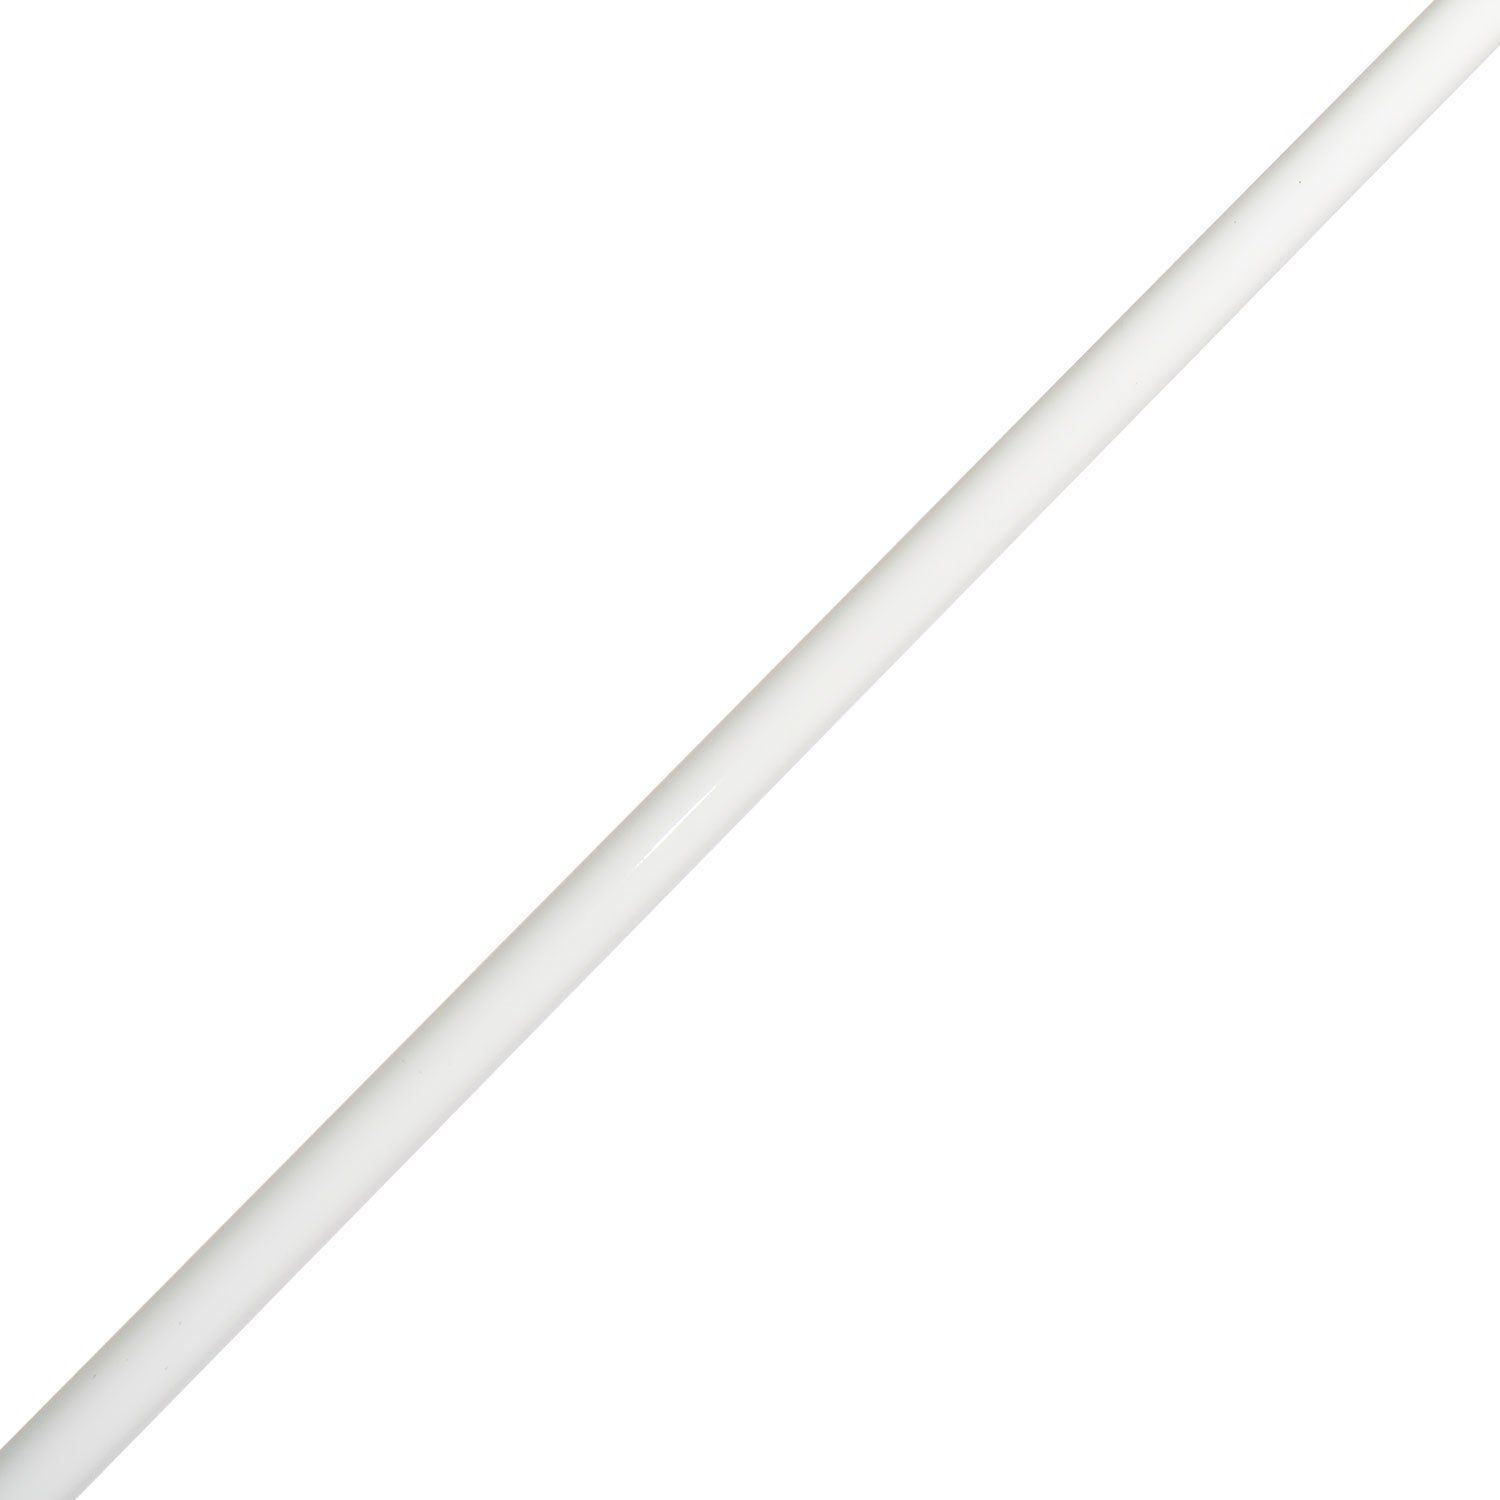 CRB 6'0" Light Color Series Rod Blank - IS601L